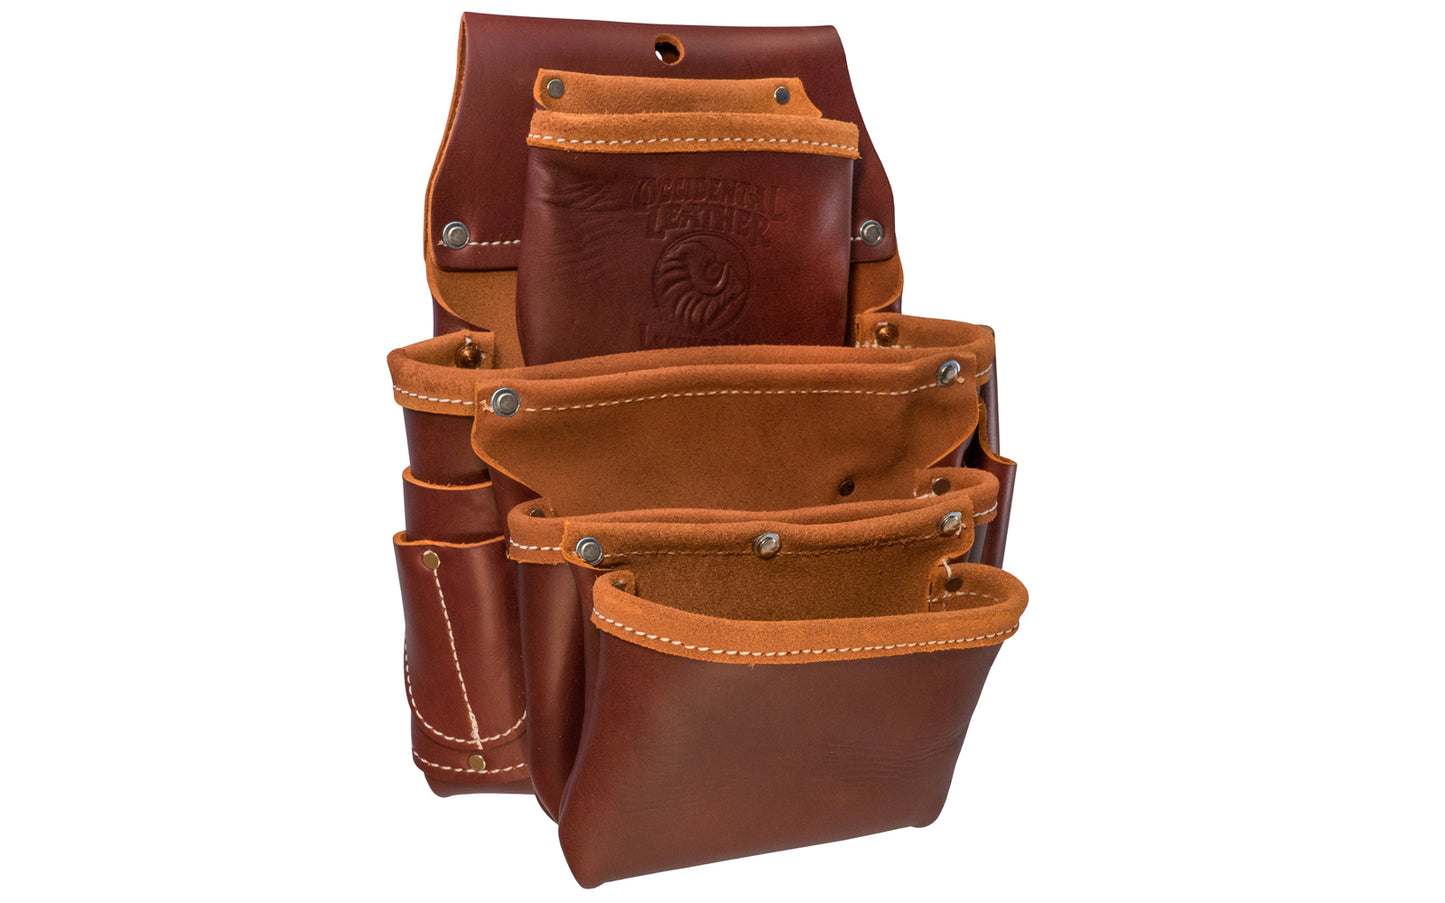 Occidental Leather 4-Pouch "Pro Fastener" Bag with Tape Pocket ~ 5062 - Fits 3" work belt - 9 total pockets & tool holders - Genuine leather - Made in USA - 759244009309 - Highly recommended for framing & general carpentry applications. Holders for 1” blade square, angle square, cat’s paw, driver bits - Four Pouch Bag